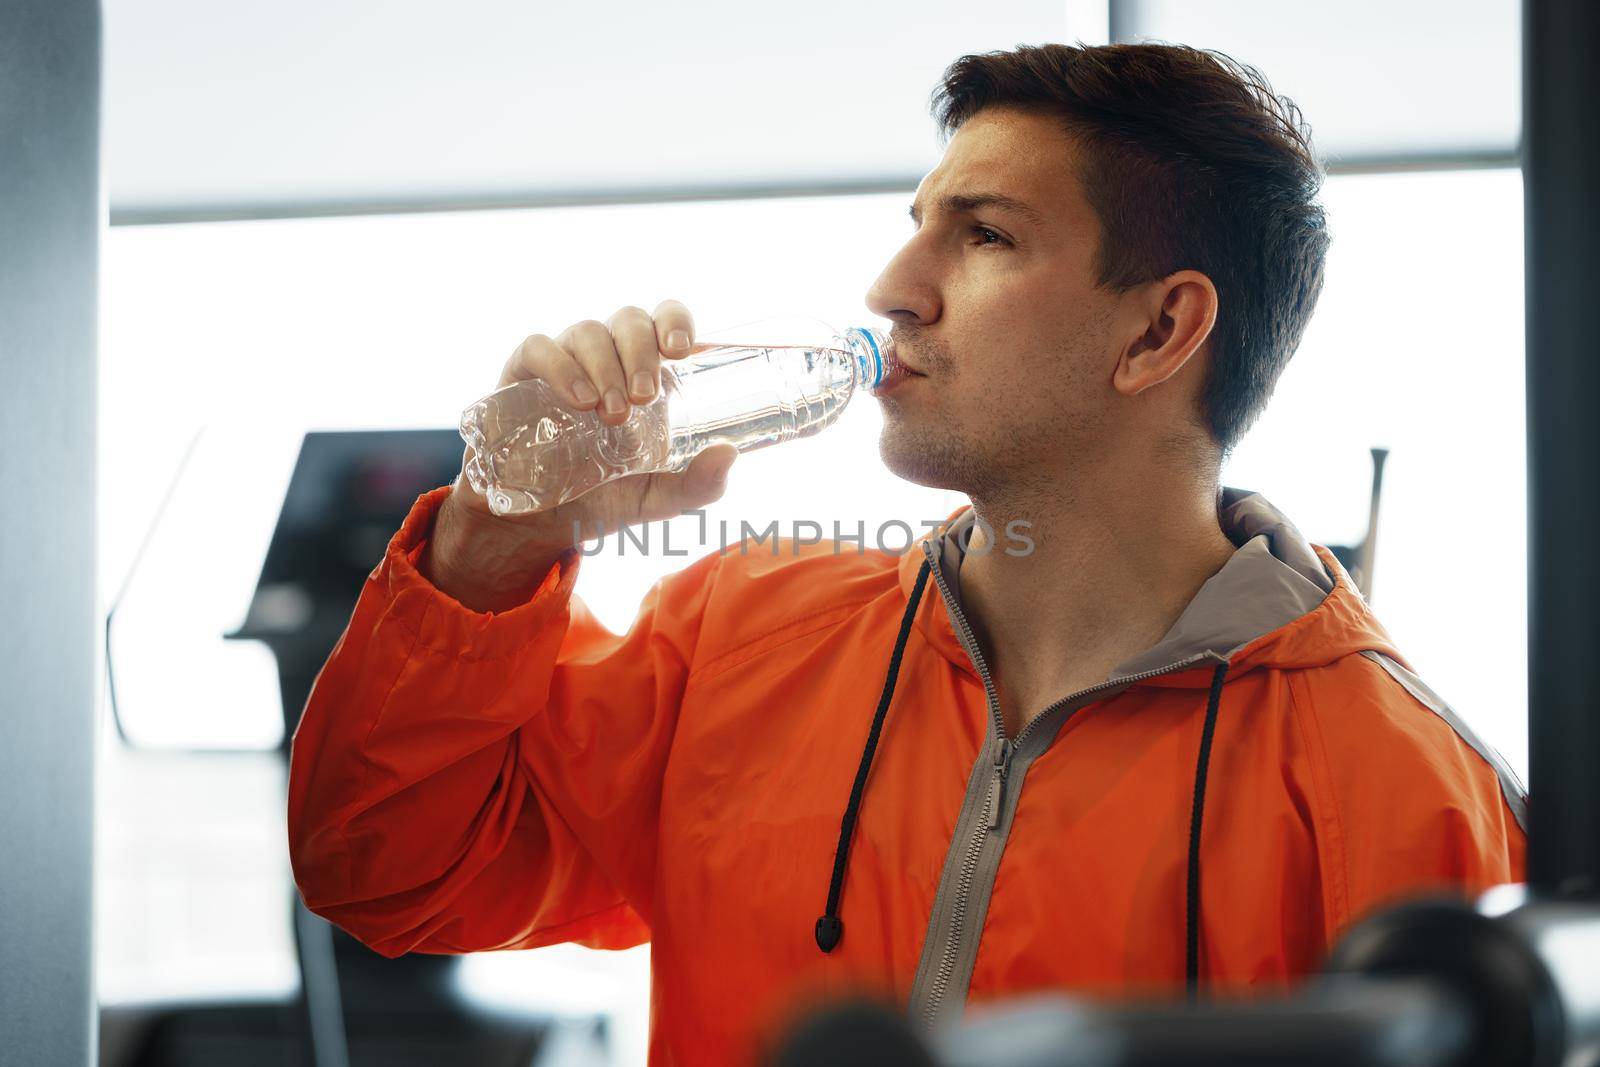 Portrait of young man drinking some water from a bottle in a gym by Fabrikasimf